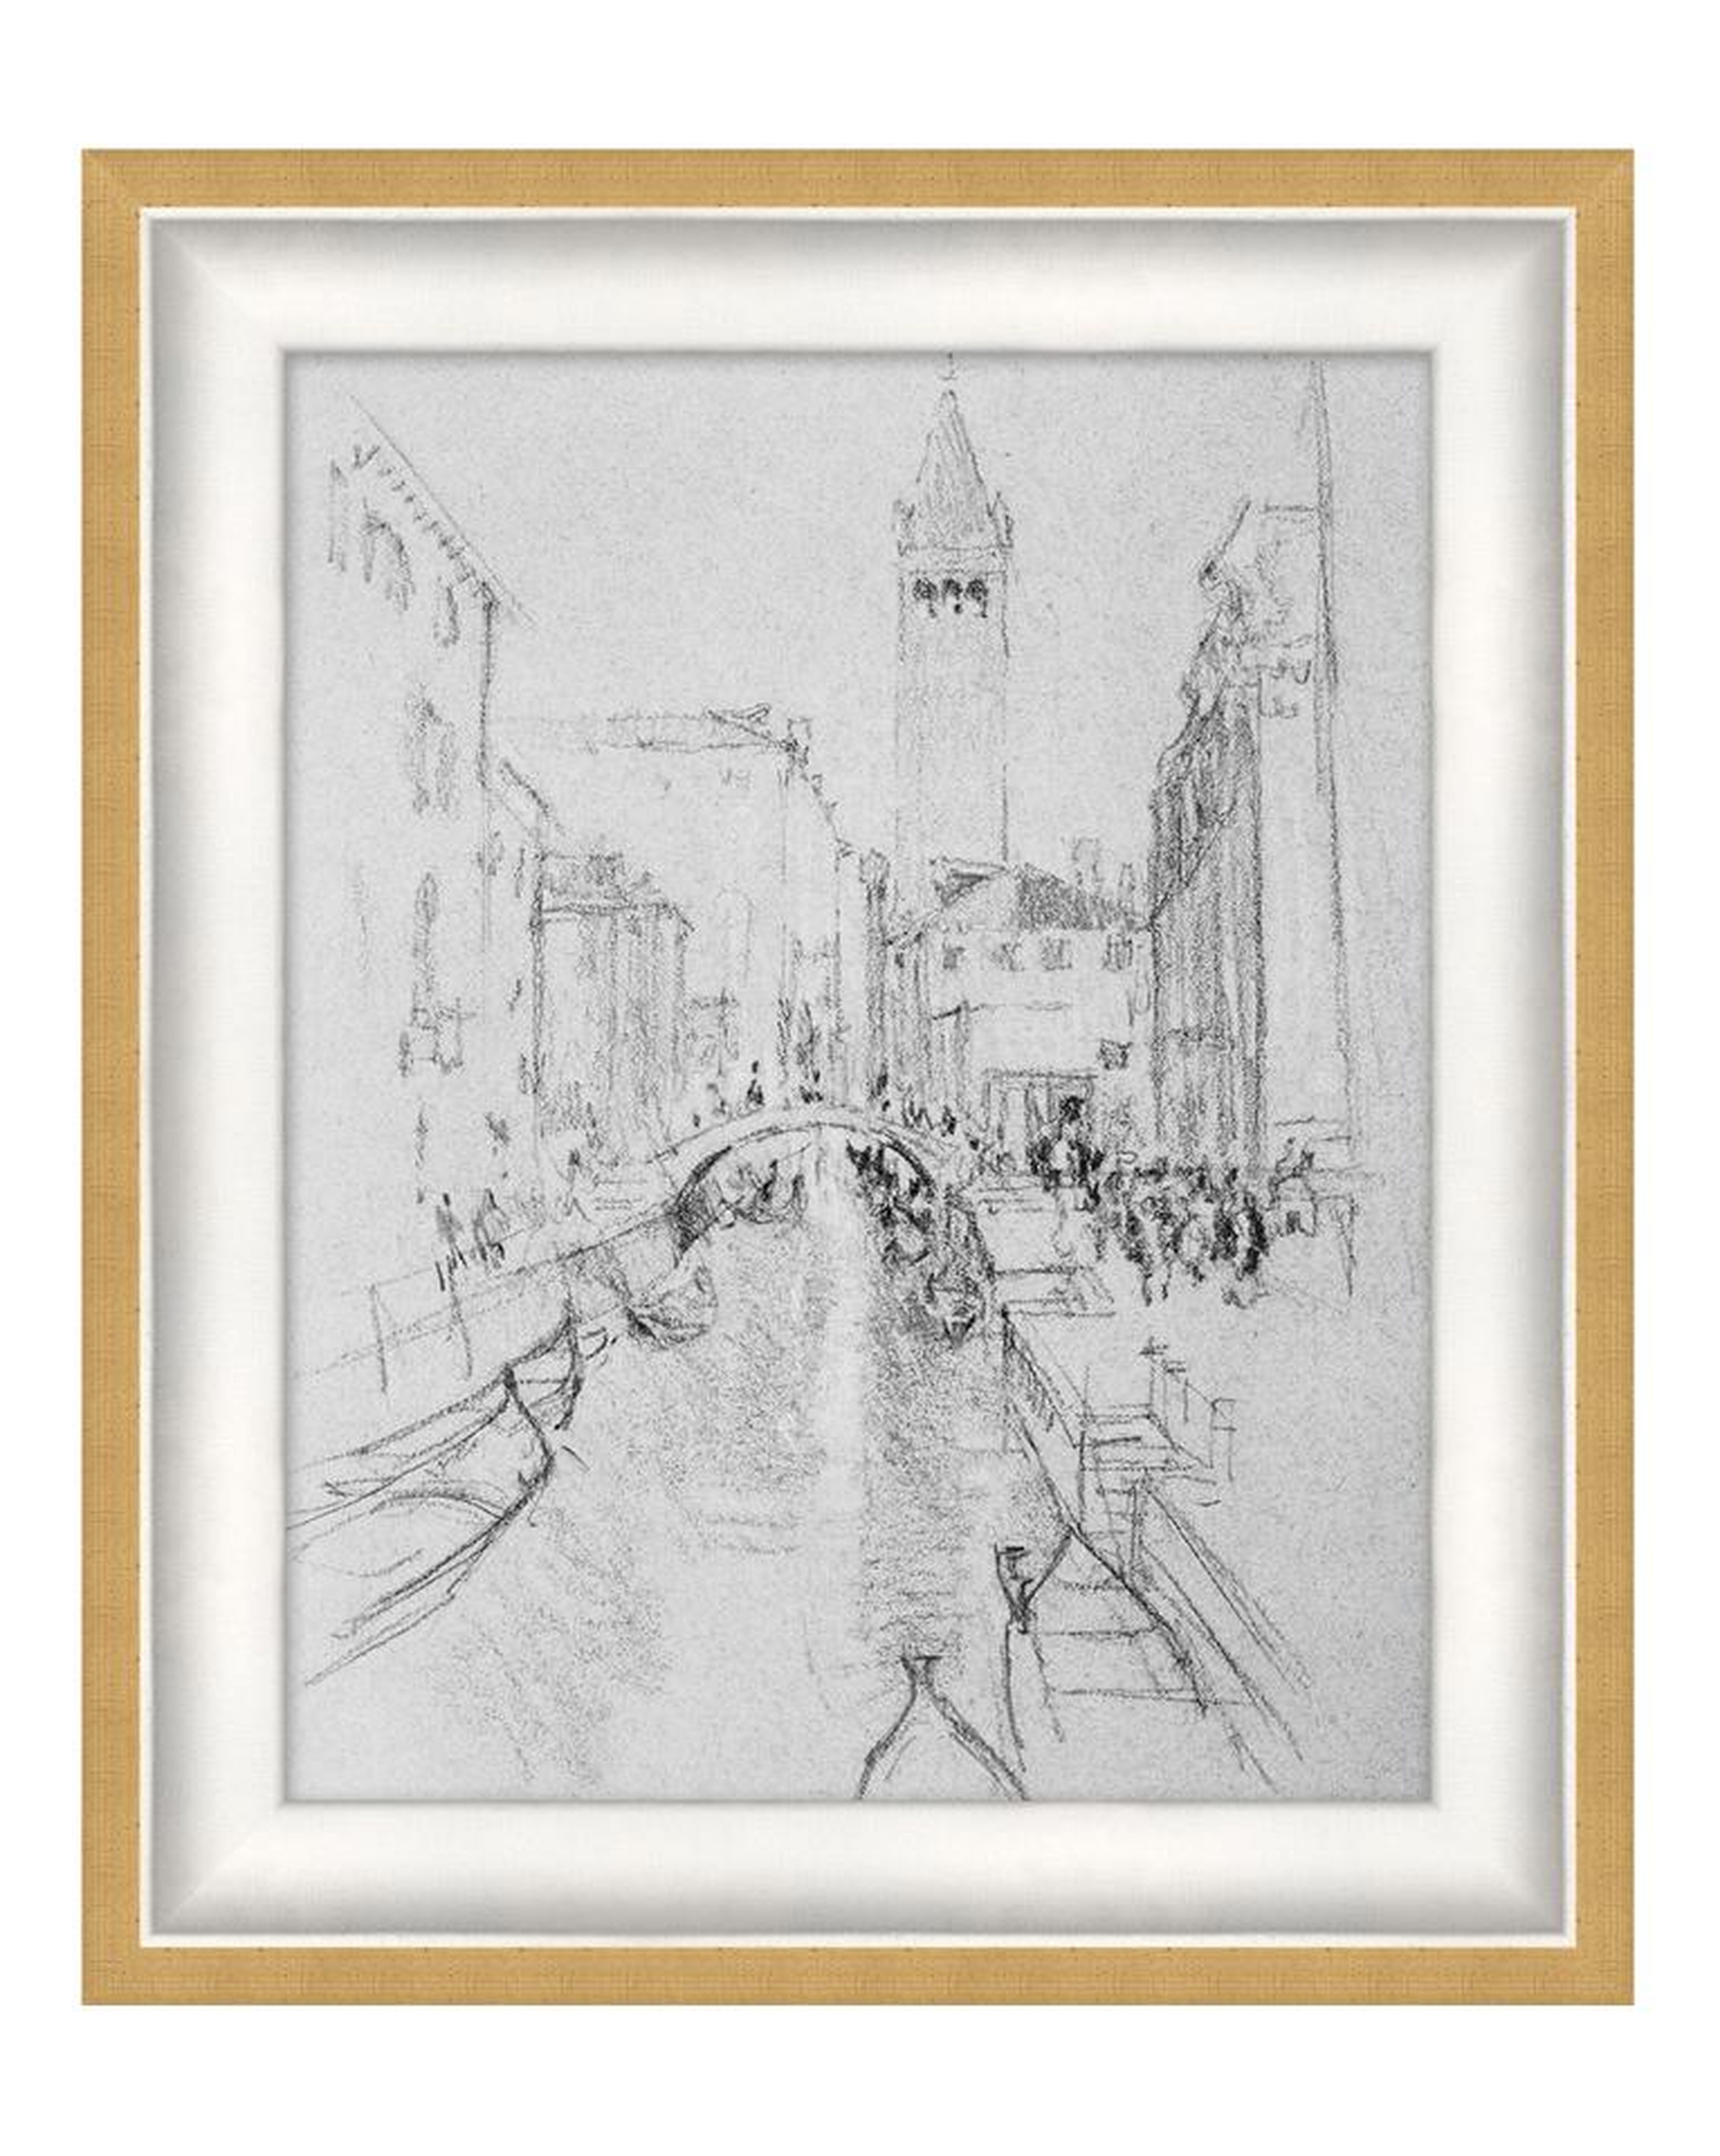 CANAL SKETCH Framed Art - McGee & Co.